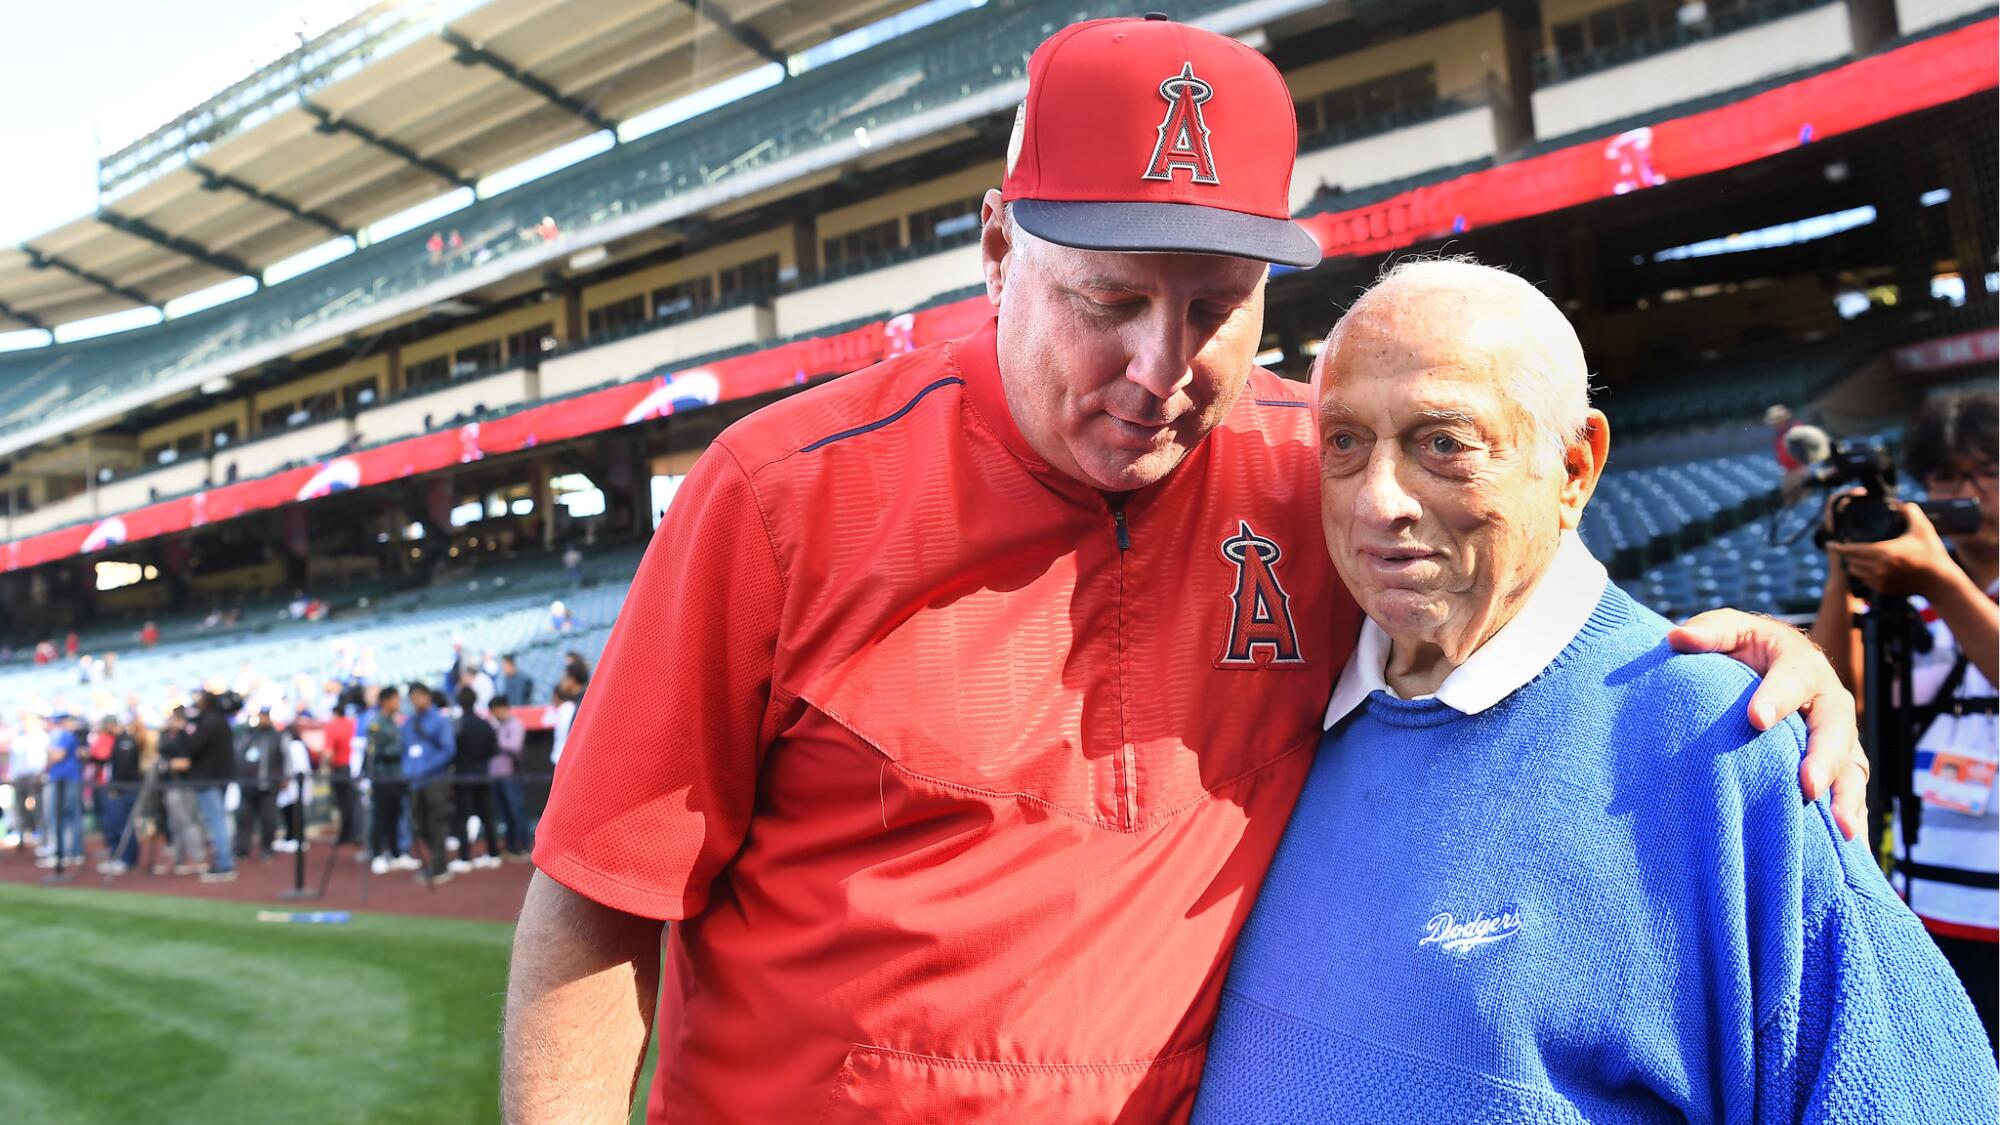 Angels manager Mike Scioscia, who played for Tommy Lasorda with the Dodgers, gives him a hug before a 2018 exhibition game.